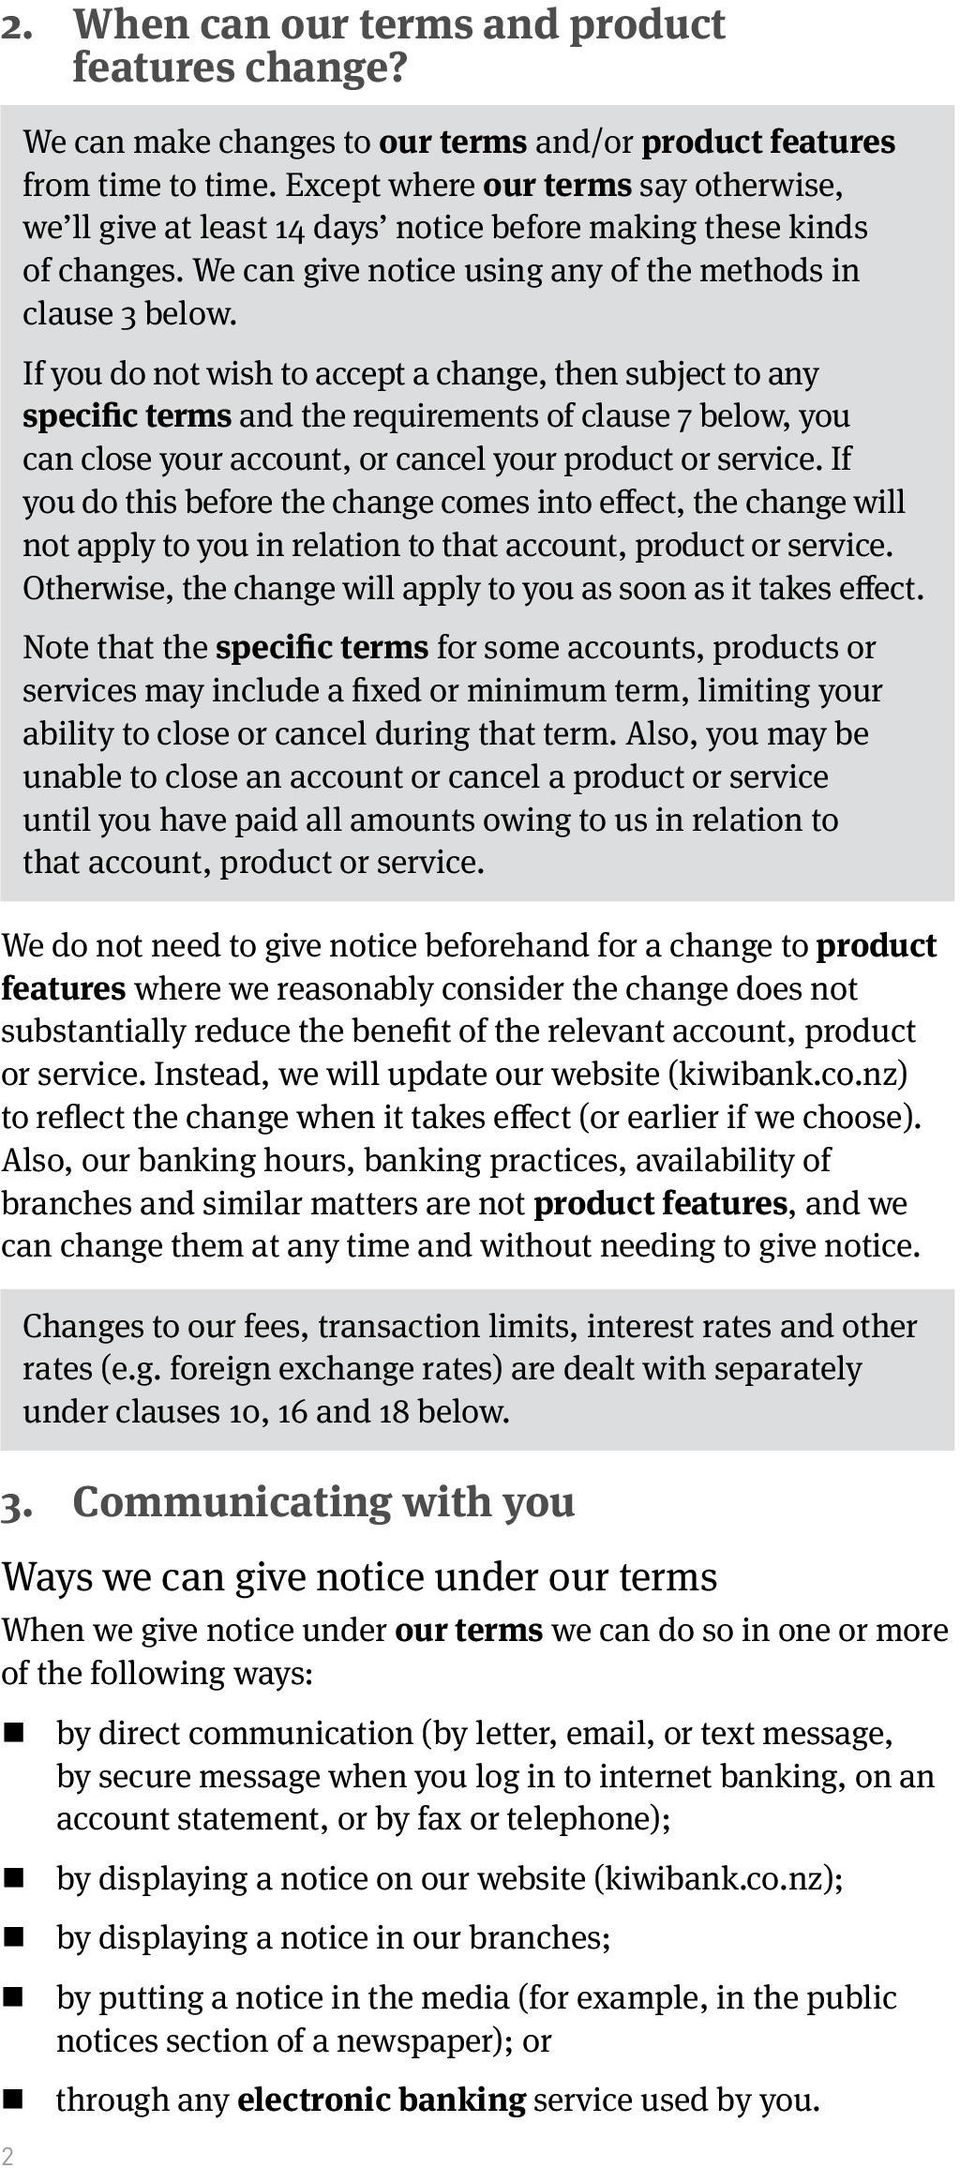 If you do not wish to accept a change, then subject to any specific terms and the requirements of clause 7 below, you can close your account, or cancel your product or service.